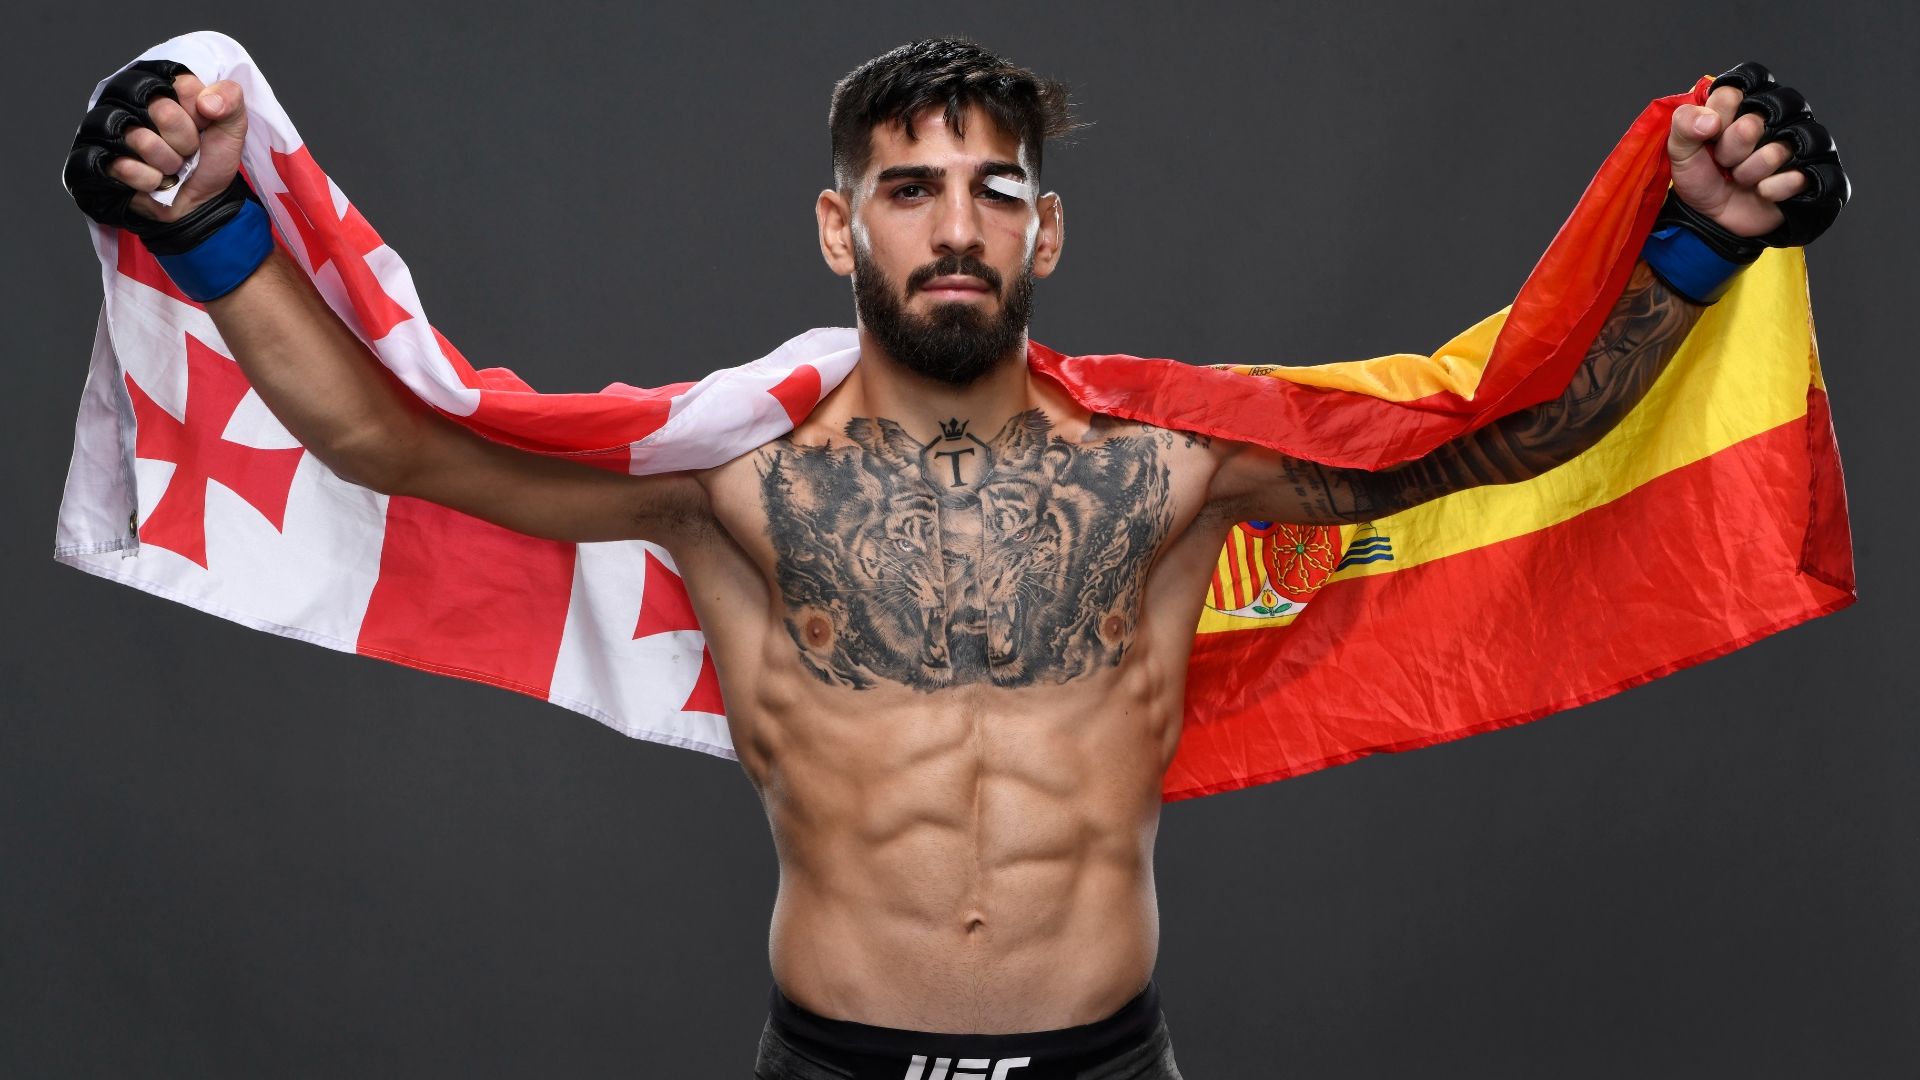 UFC fighter Topuria beats up a man in a bar in Spain